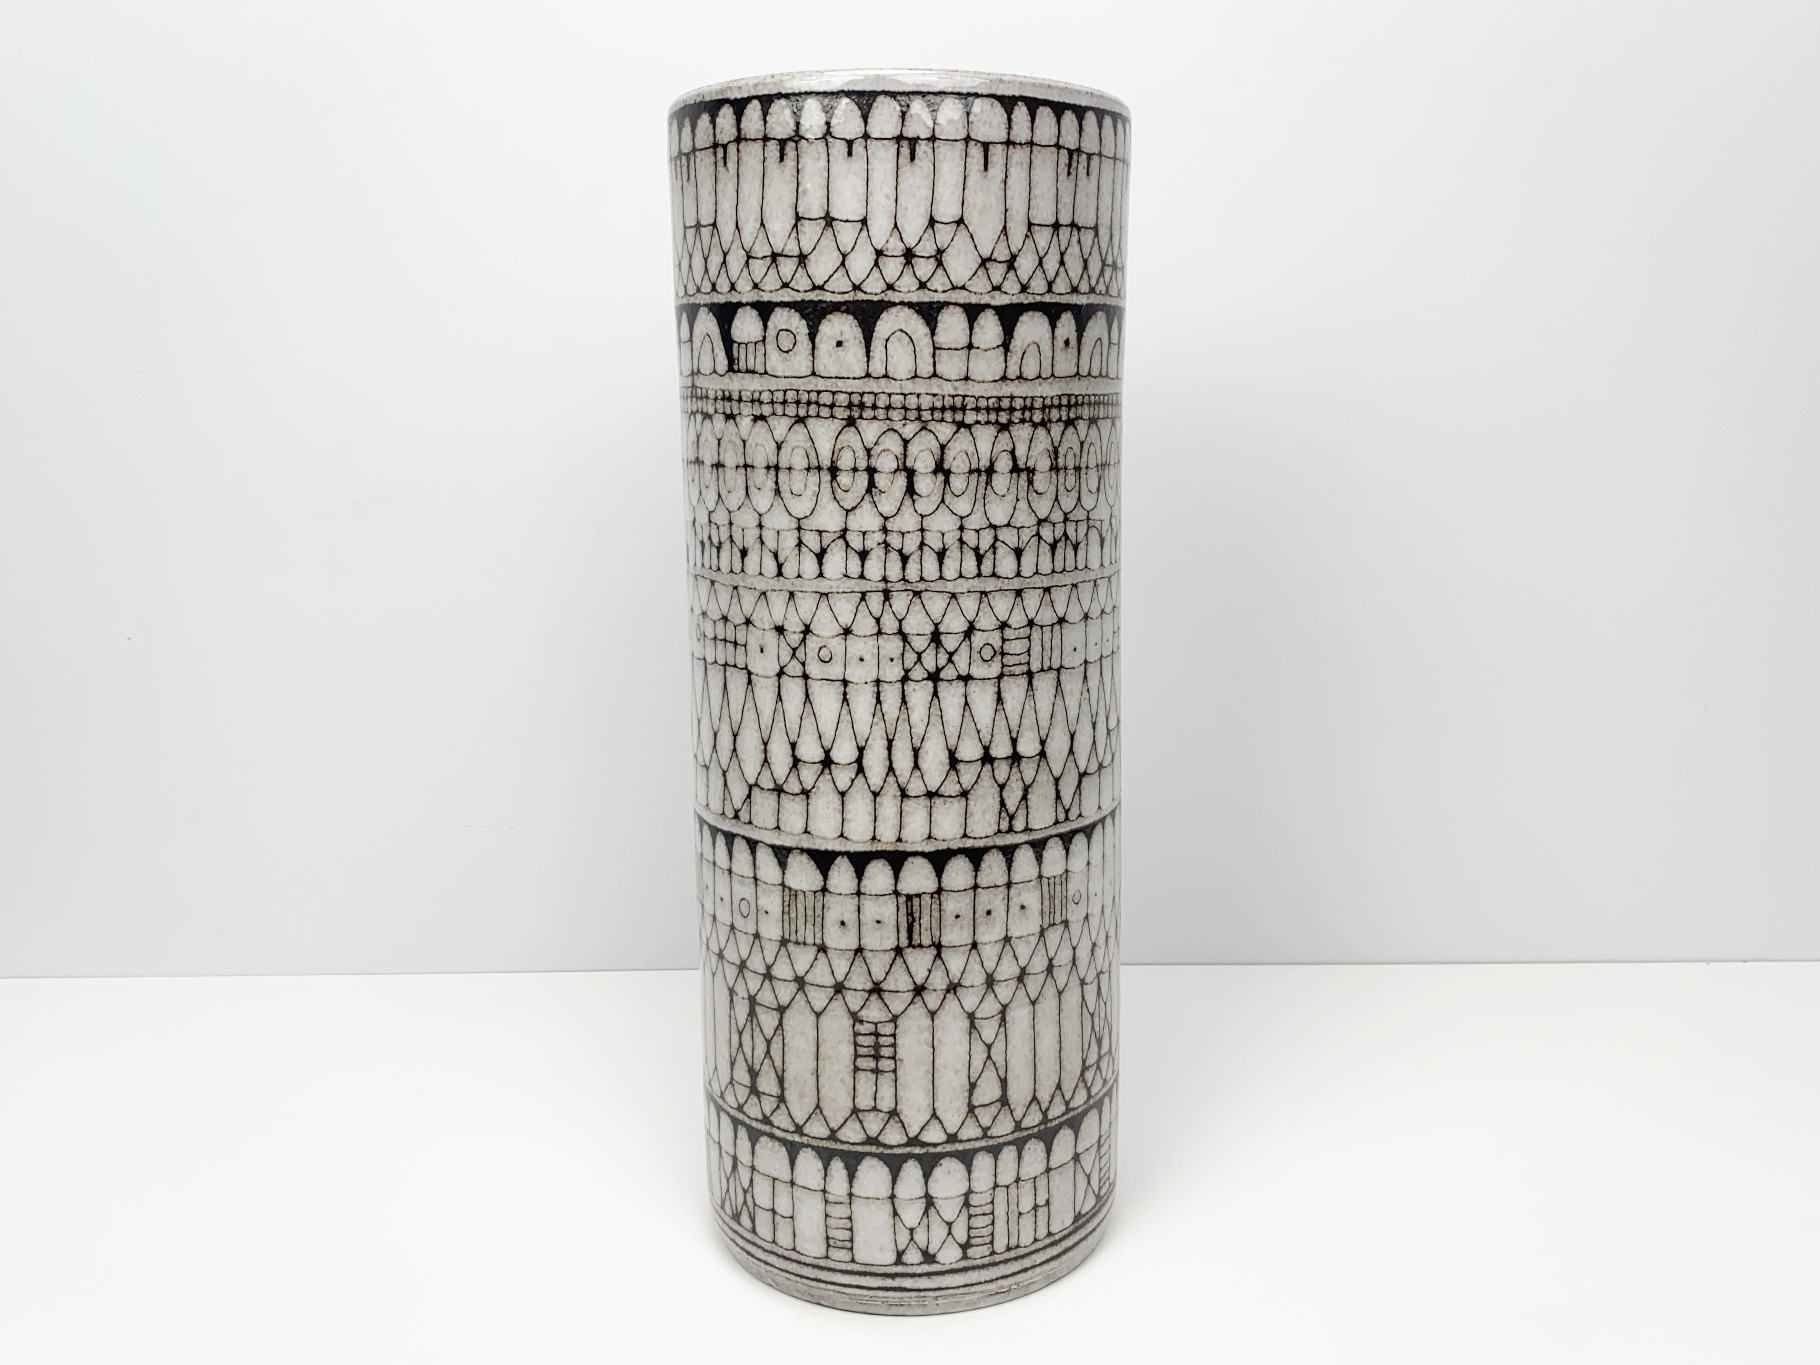 Large Vase, Ceramic, Earthenware, Unique Piece, abstract Decoration, Sgraffito Technique, by Wilhelm & Elly Kuch, 1960s